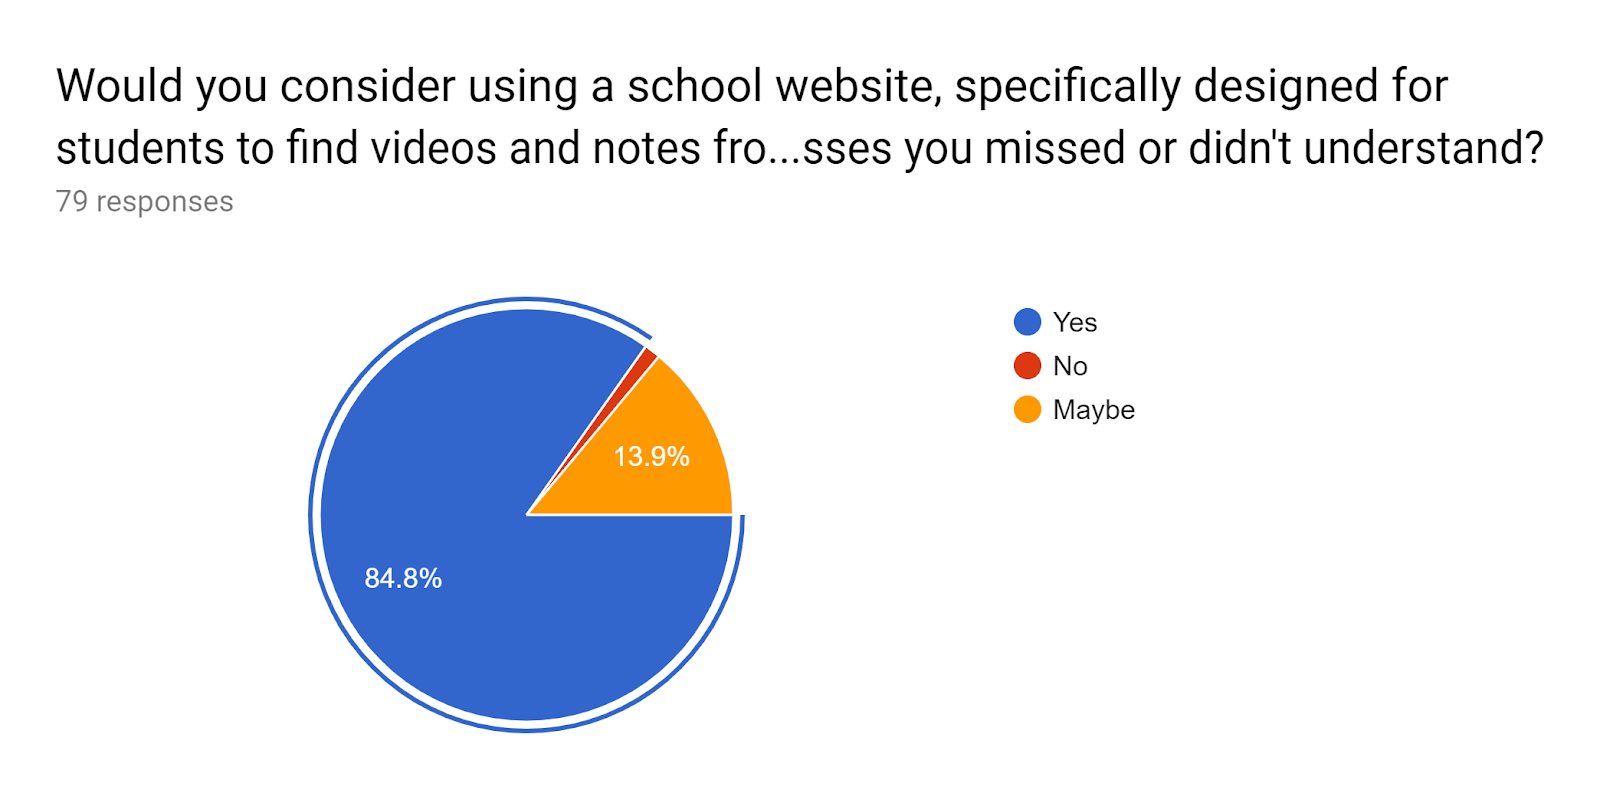 Forms response chart. Question title: Would you consider using a school website, specifically designed for students to find videos and notes from your own classes you missed or didn't understand?. Number of responses: 79 responses.